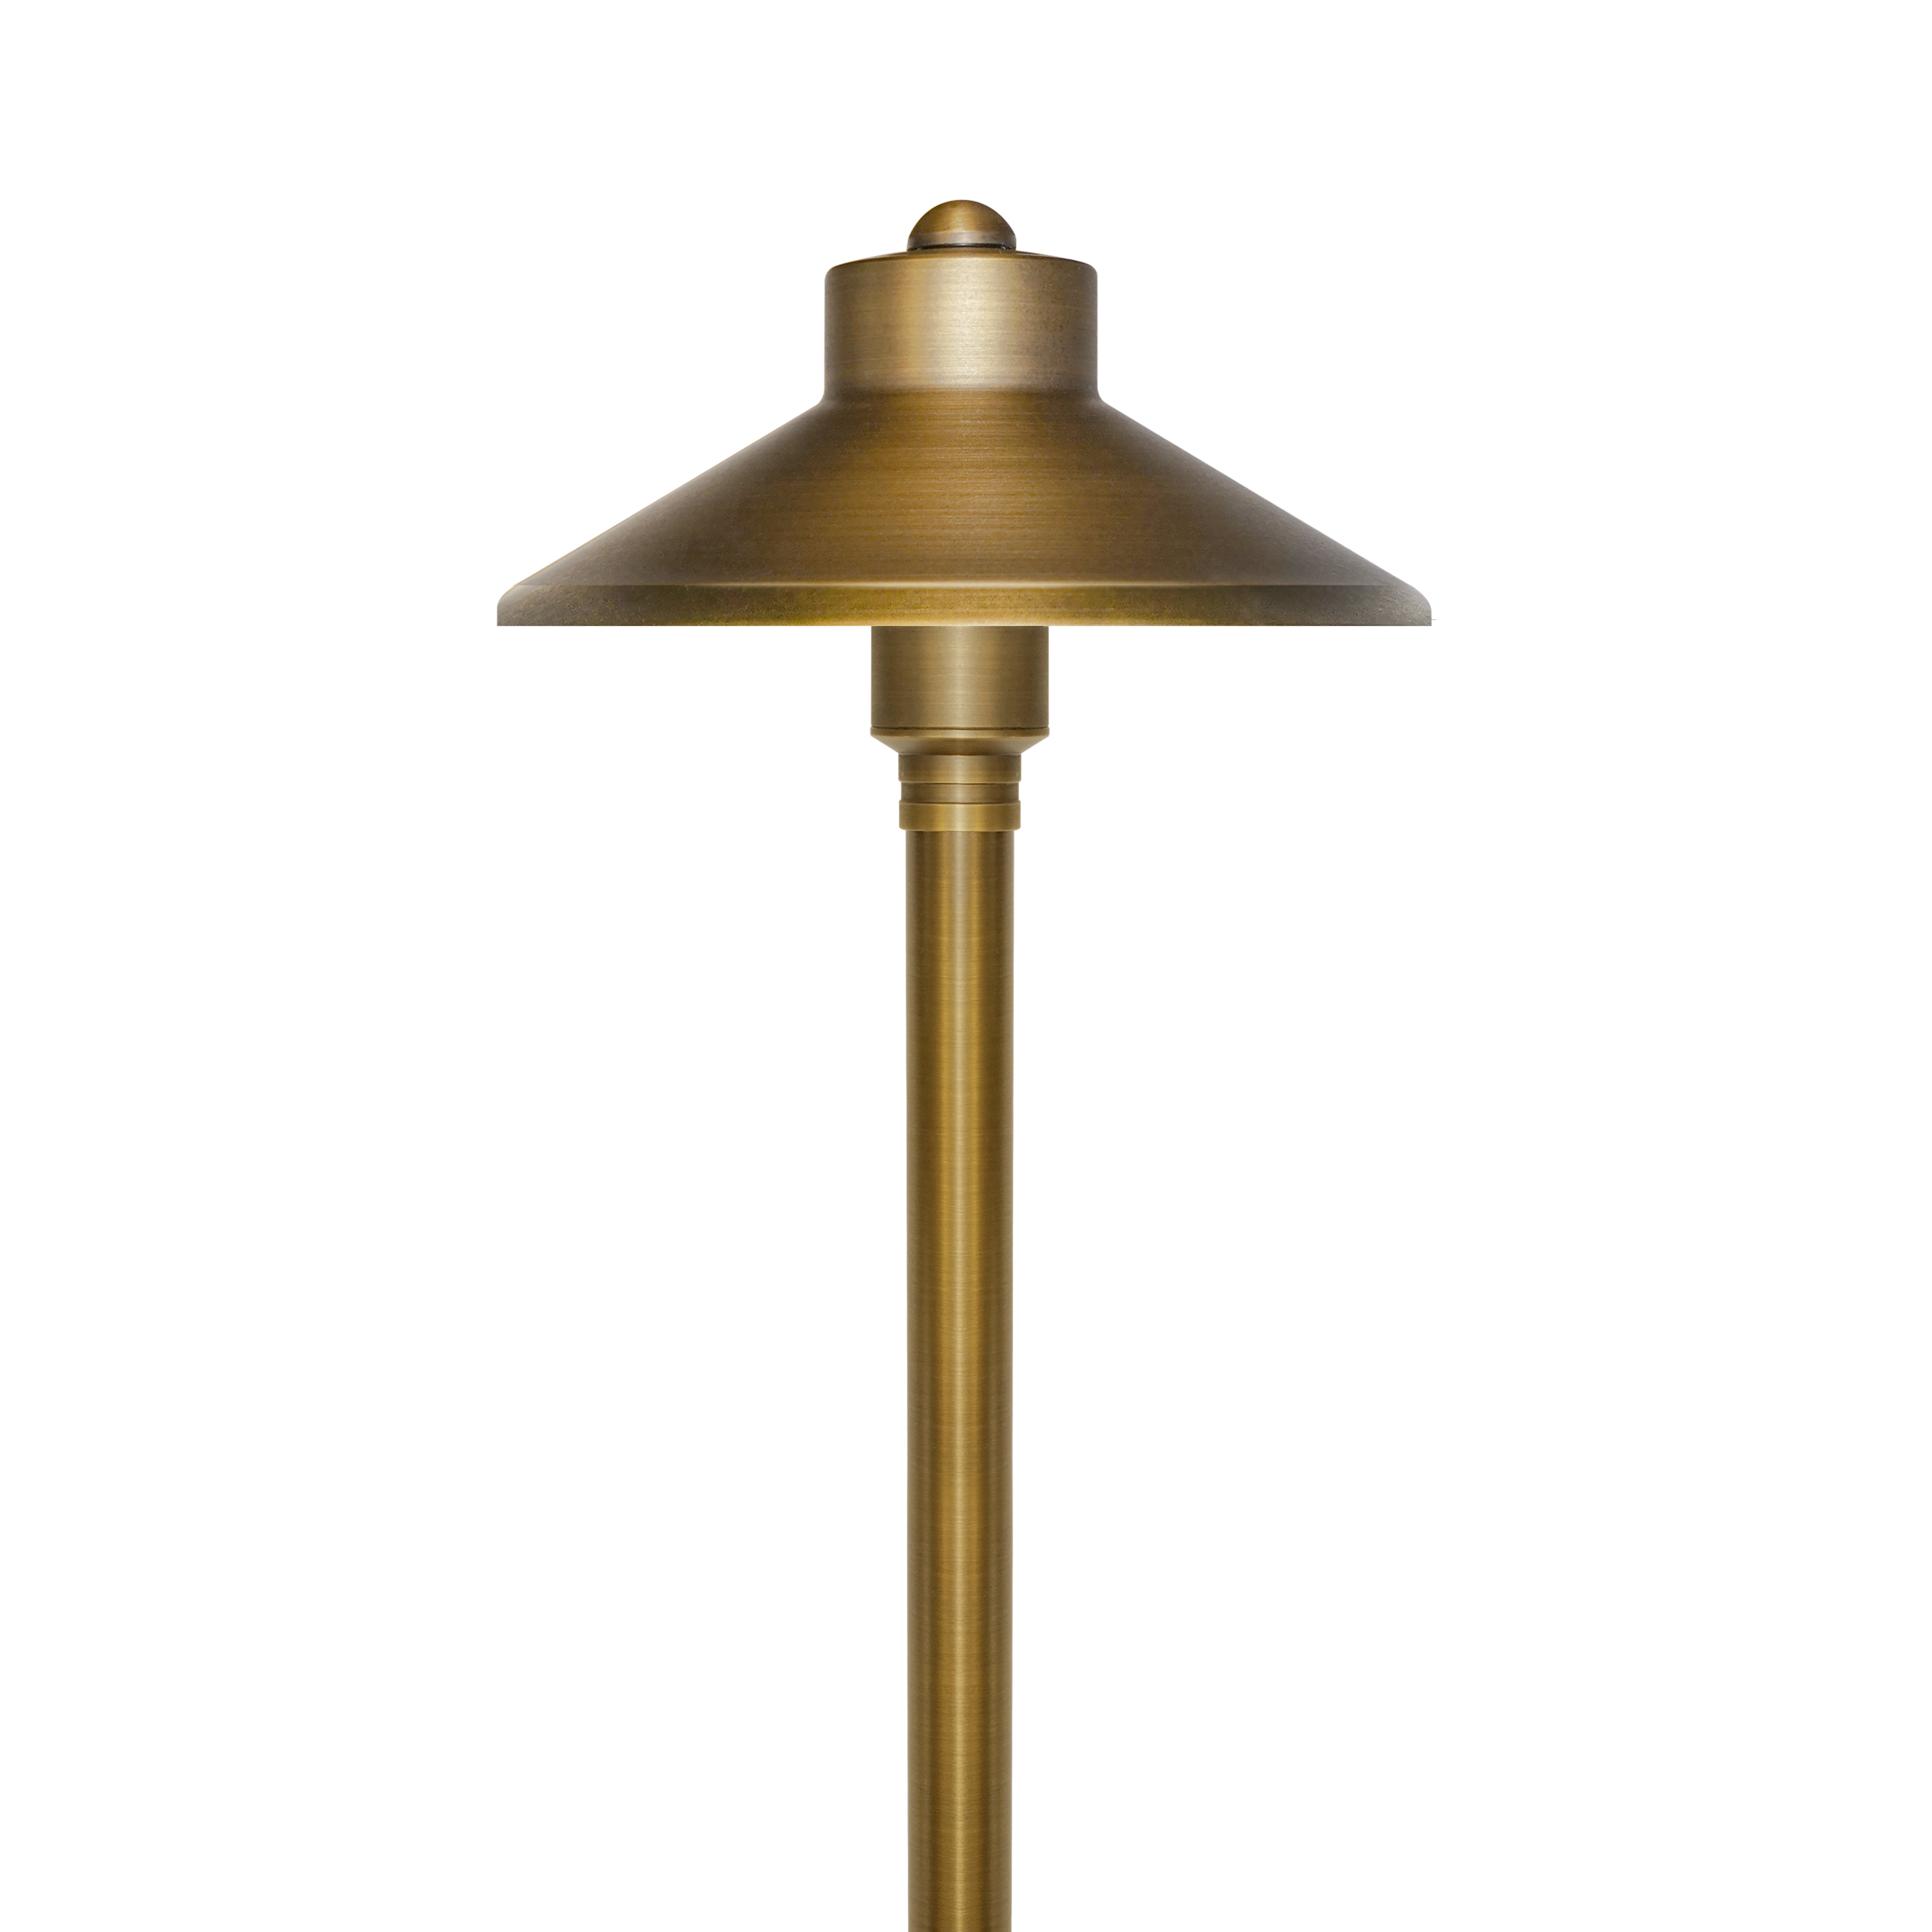 Low Voltage Solid Brass China Hat Path Light (6.7" Shade, 20" Tall), 3W, 12V AC/DC, IP65 Waterproof, 2700K